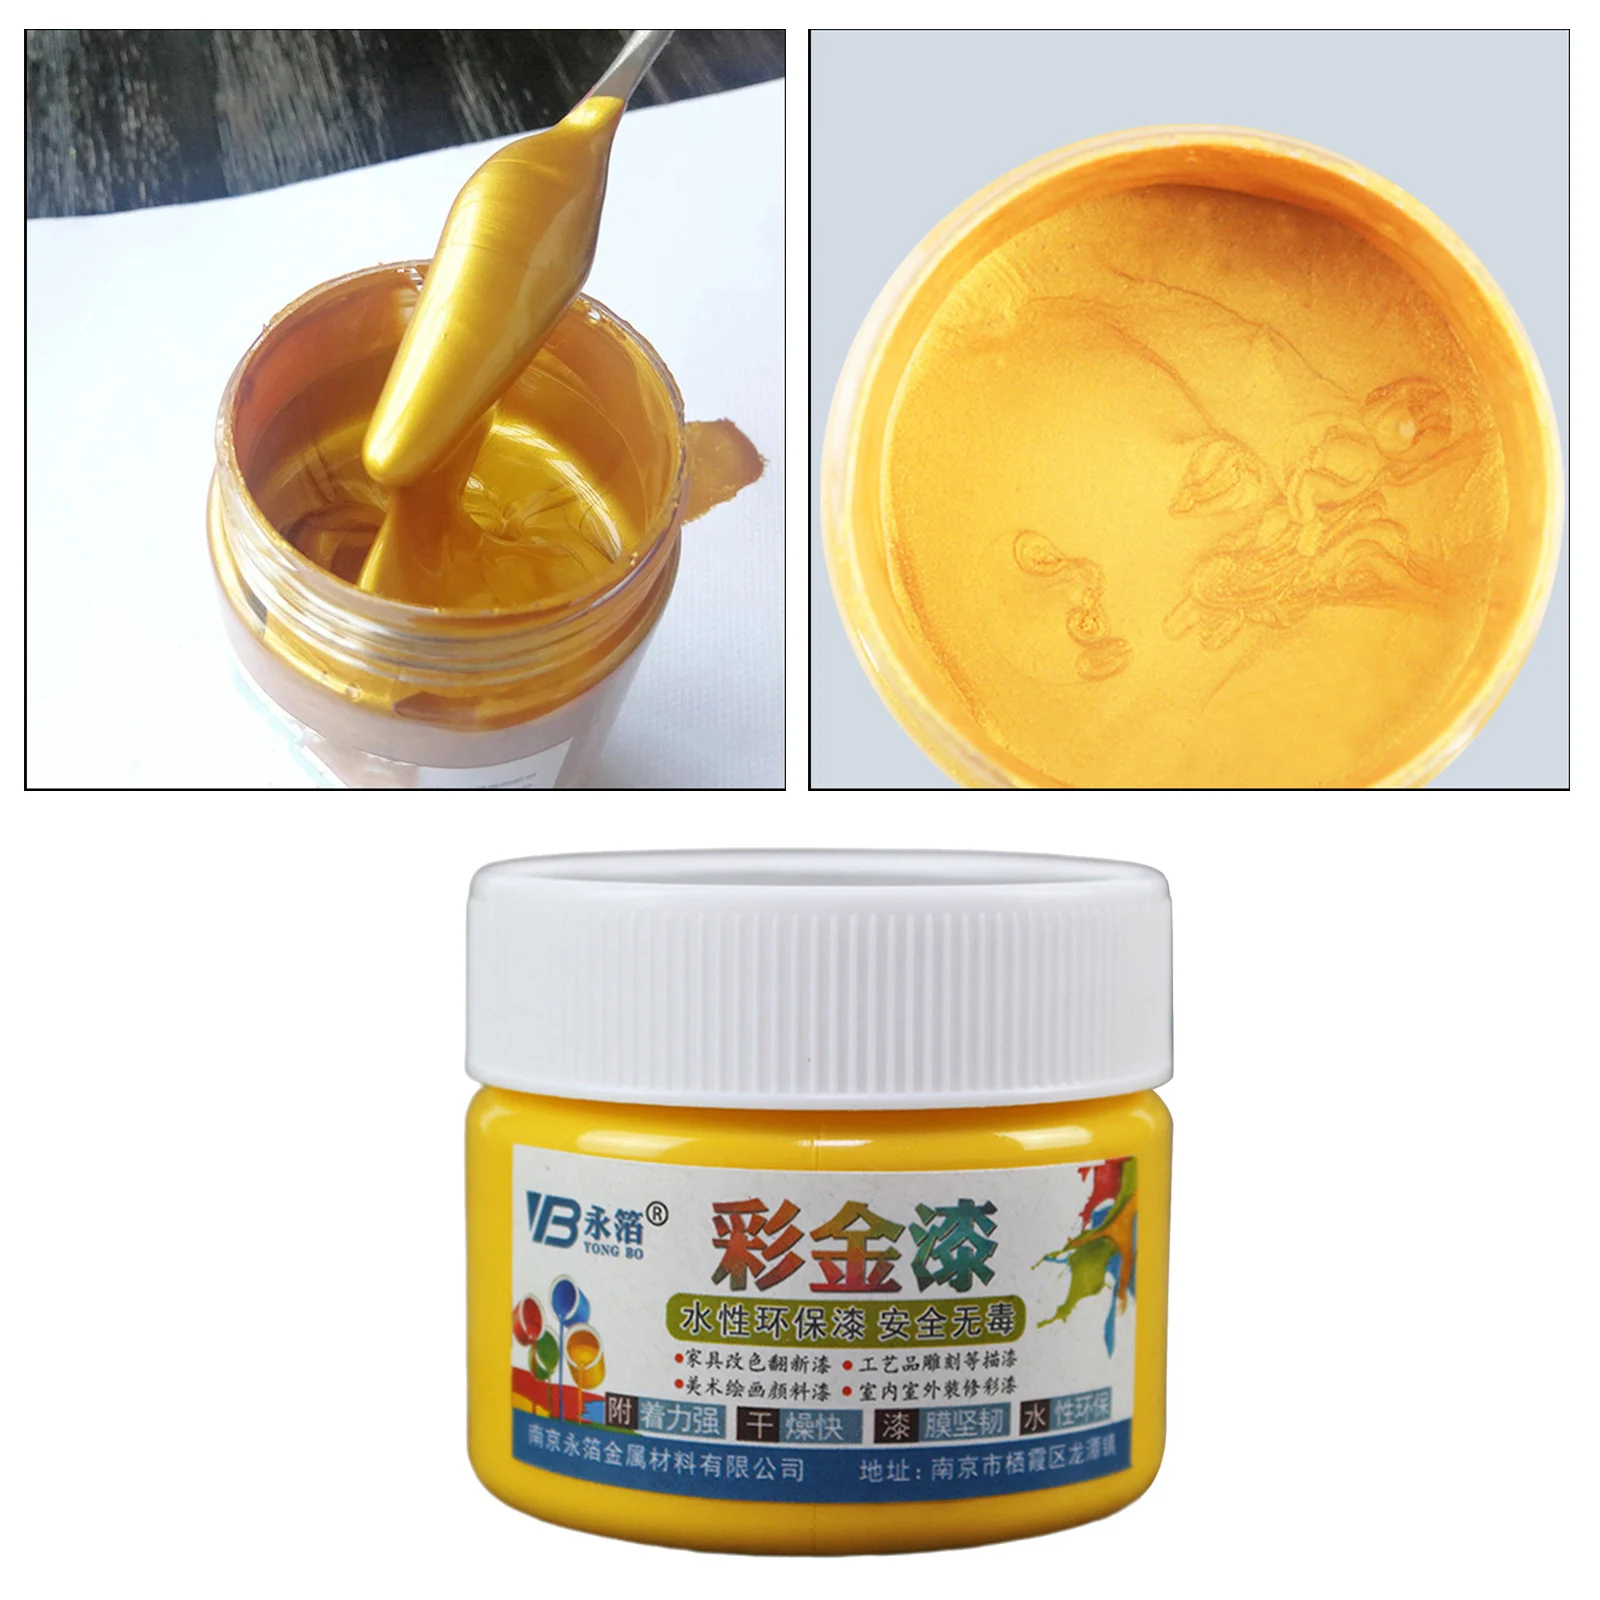 100g Artist Water Based Acrylic Paint Drawing Non-Toxic Pigments Art Crafts Ceramic Wall Fabric Beginners Painting Supplies